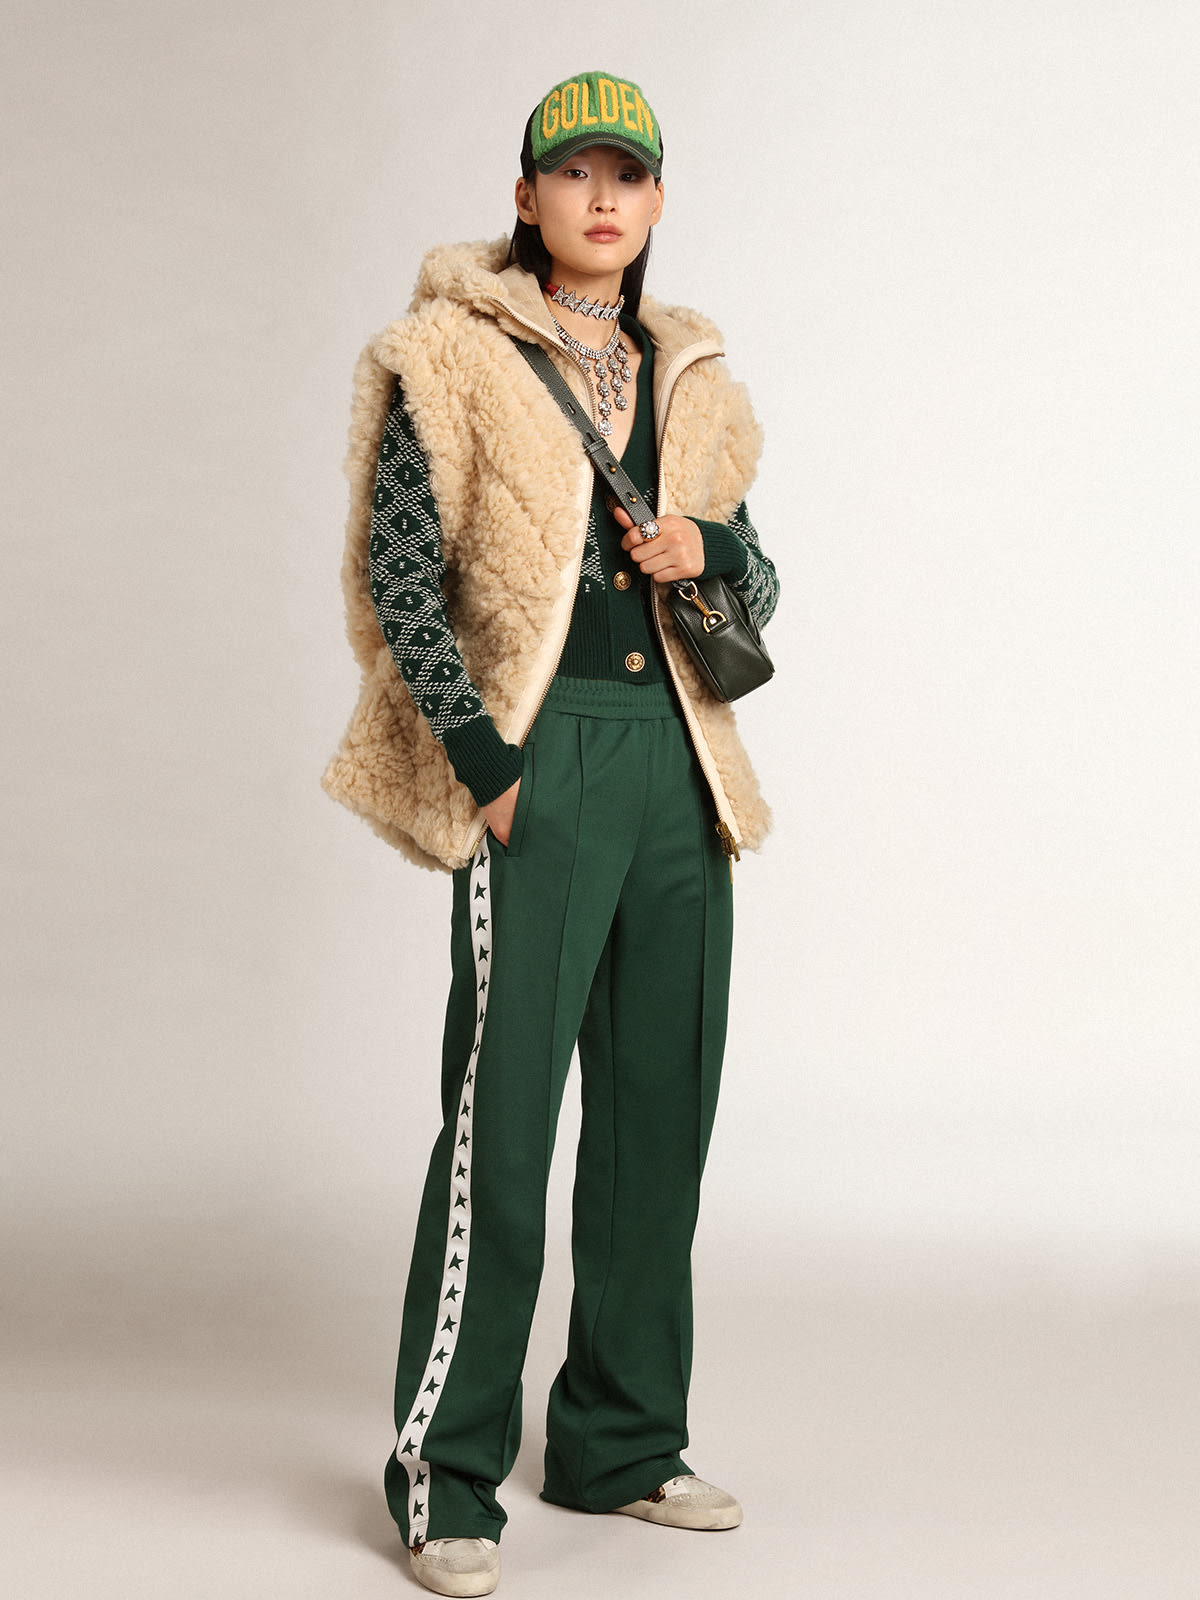 Golden Goose - Women's cropped cardigan with green and white jacquard diamond pattern in 